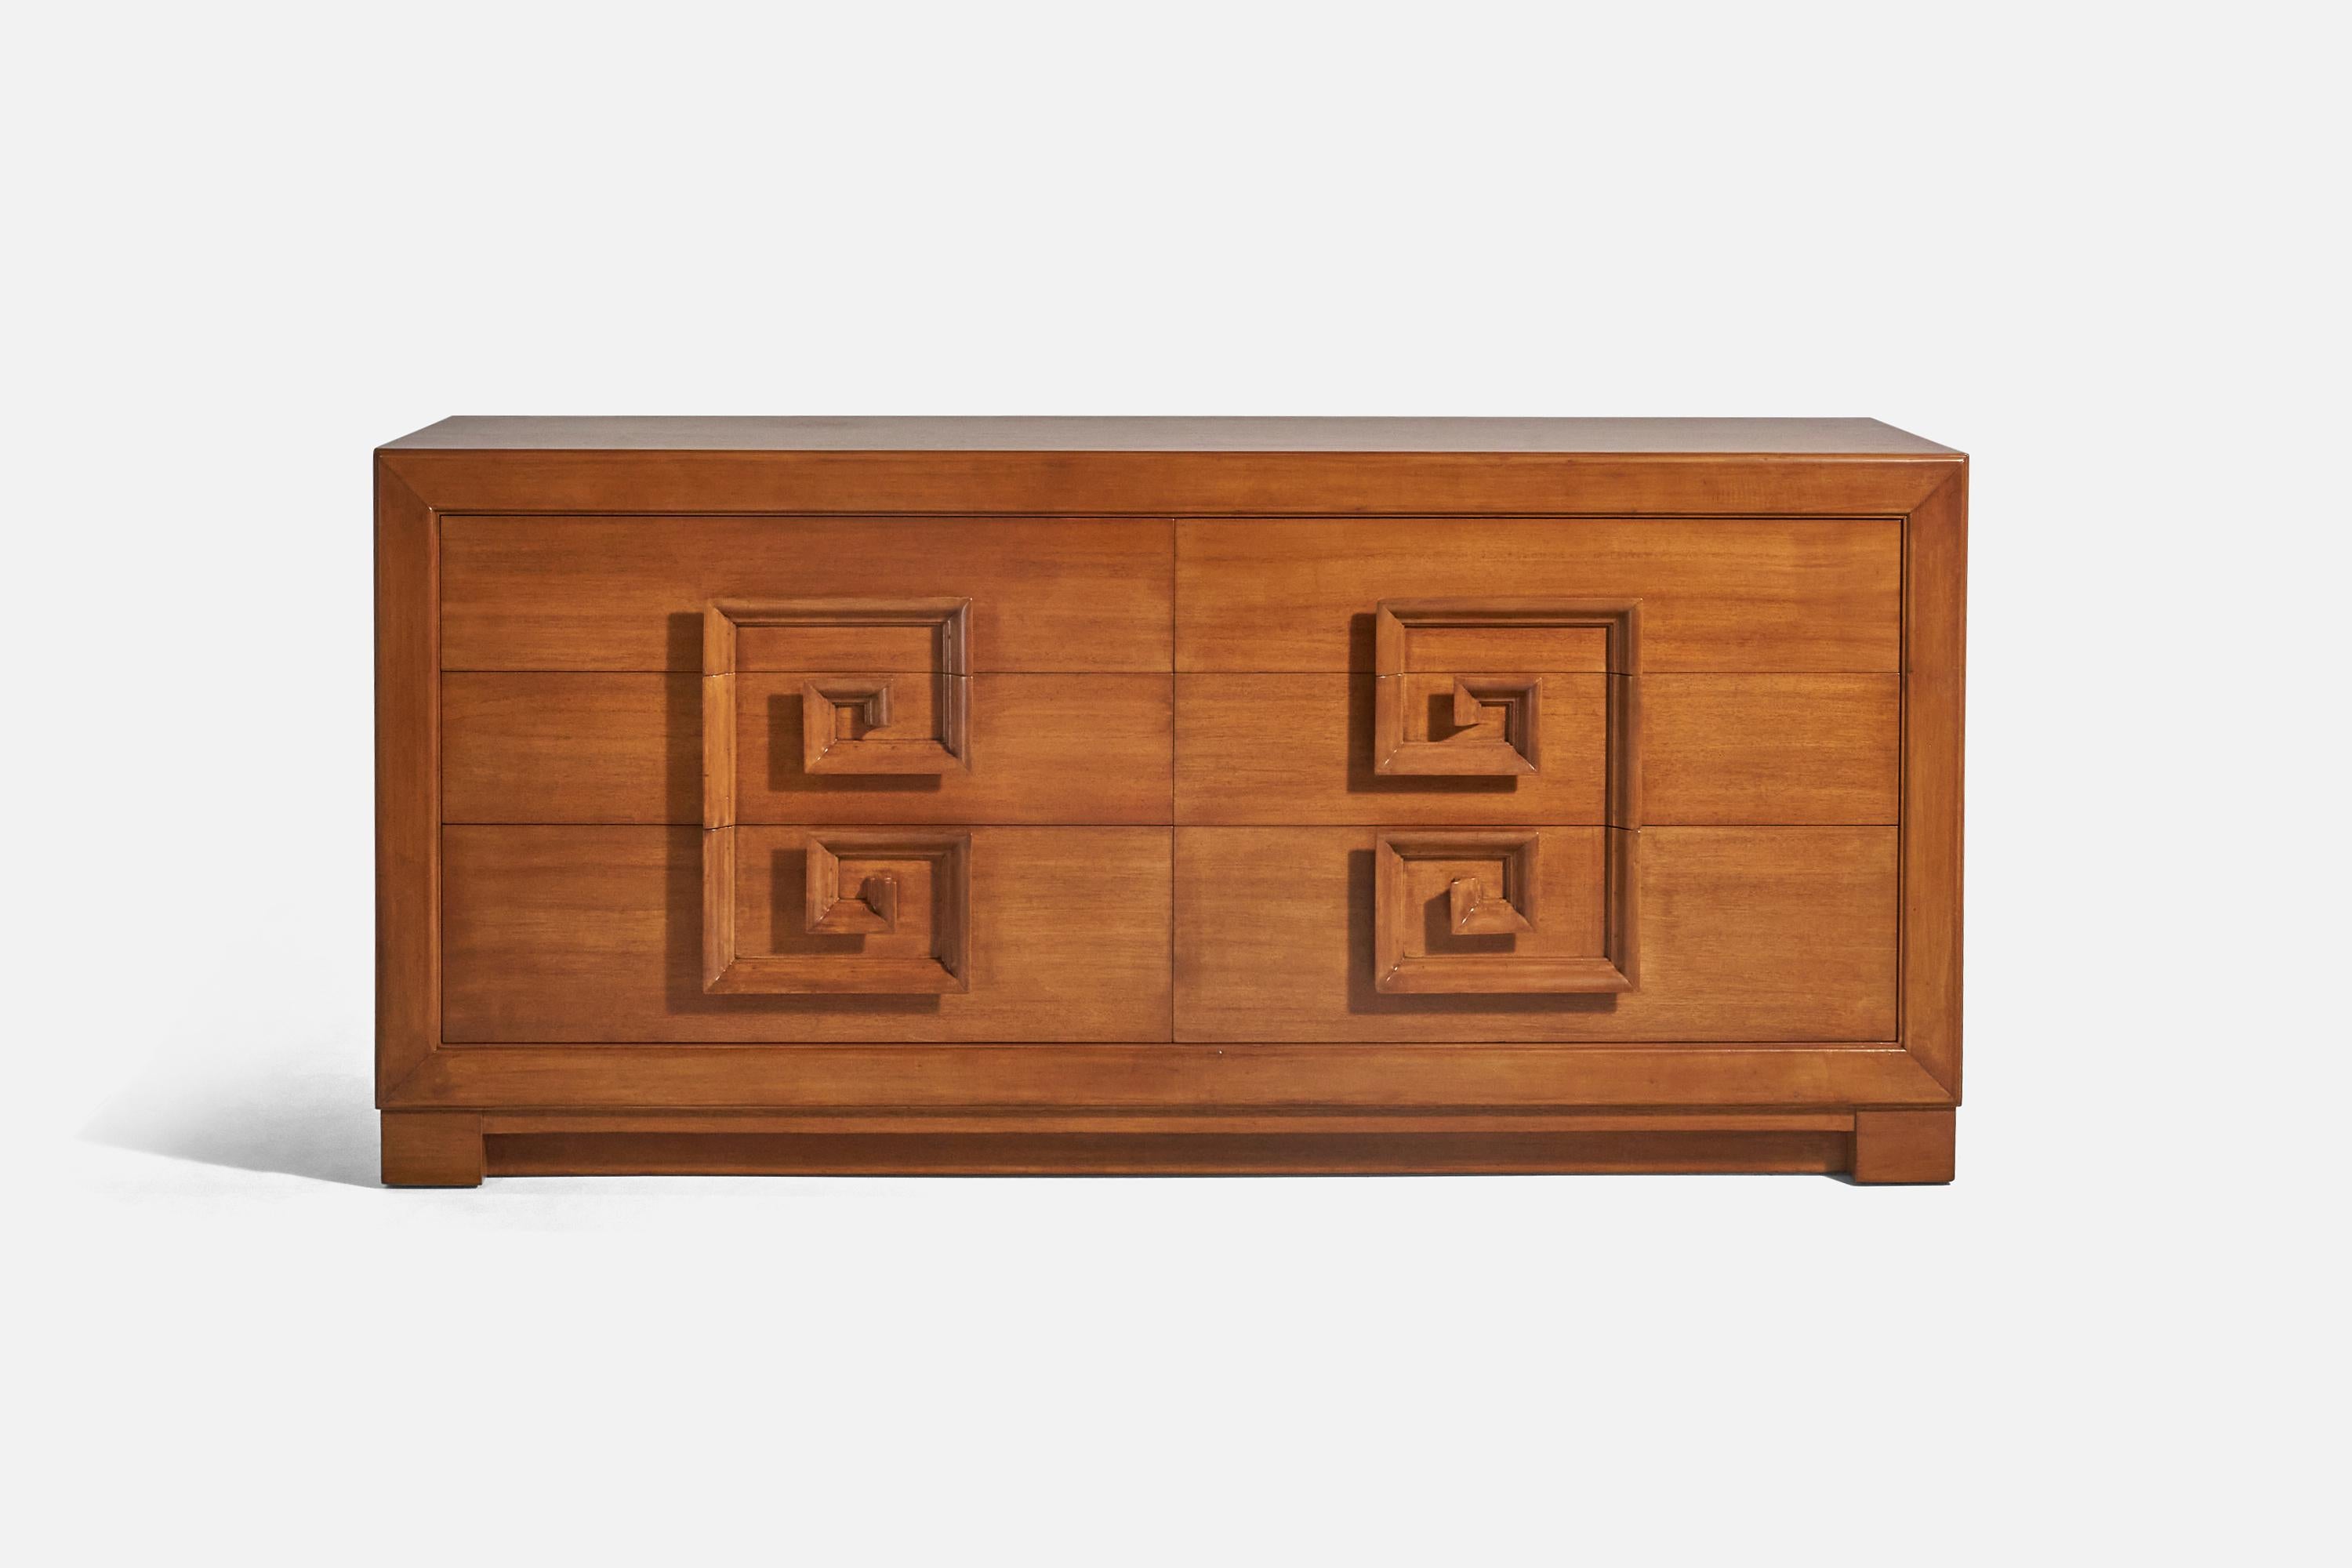 A walnut cabinet designed and produced in the United States, 1960s.